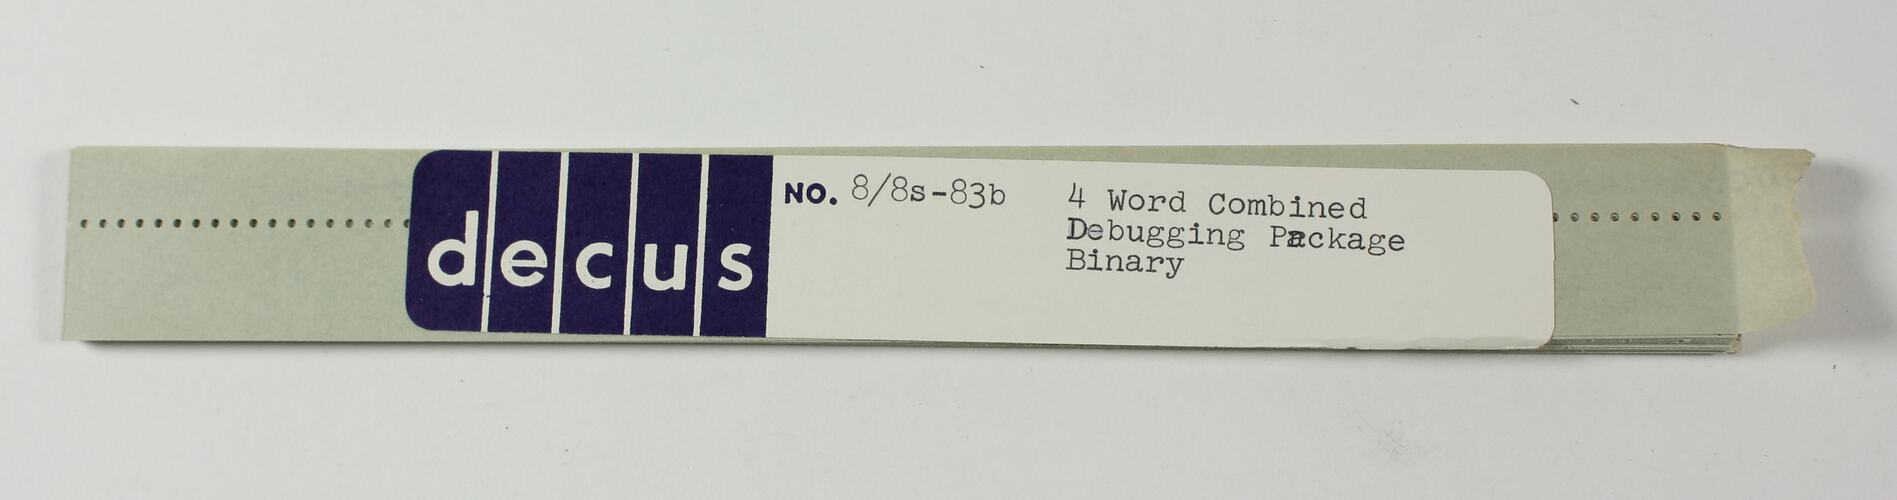 Paper Tape - DECUS, '8/8s-83b 4 Word Combined Debugging Package, Binary'